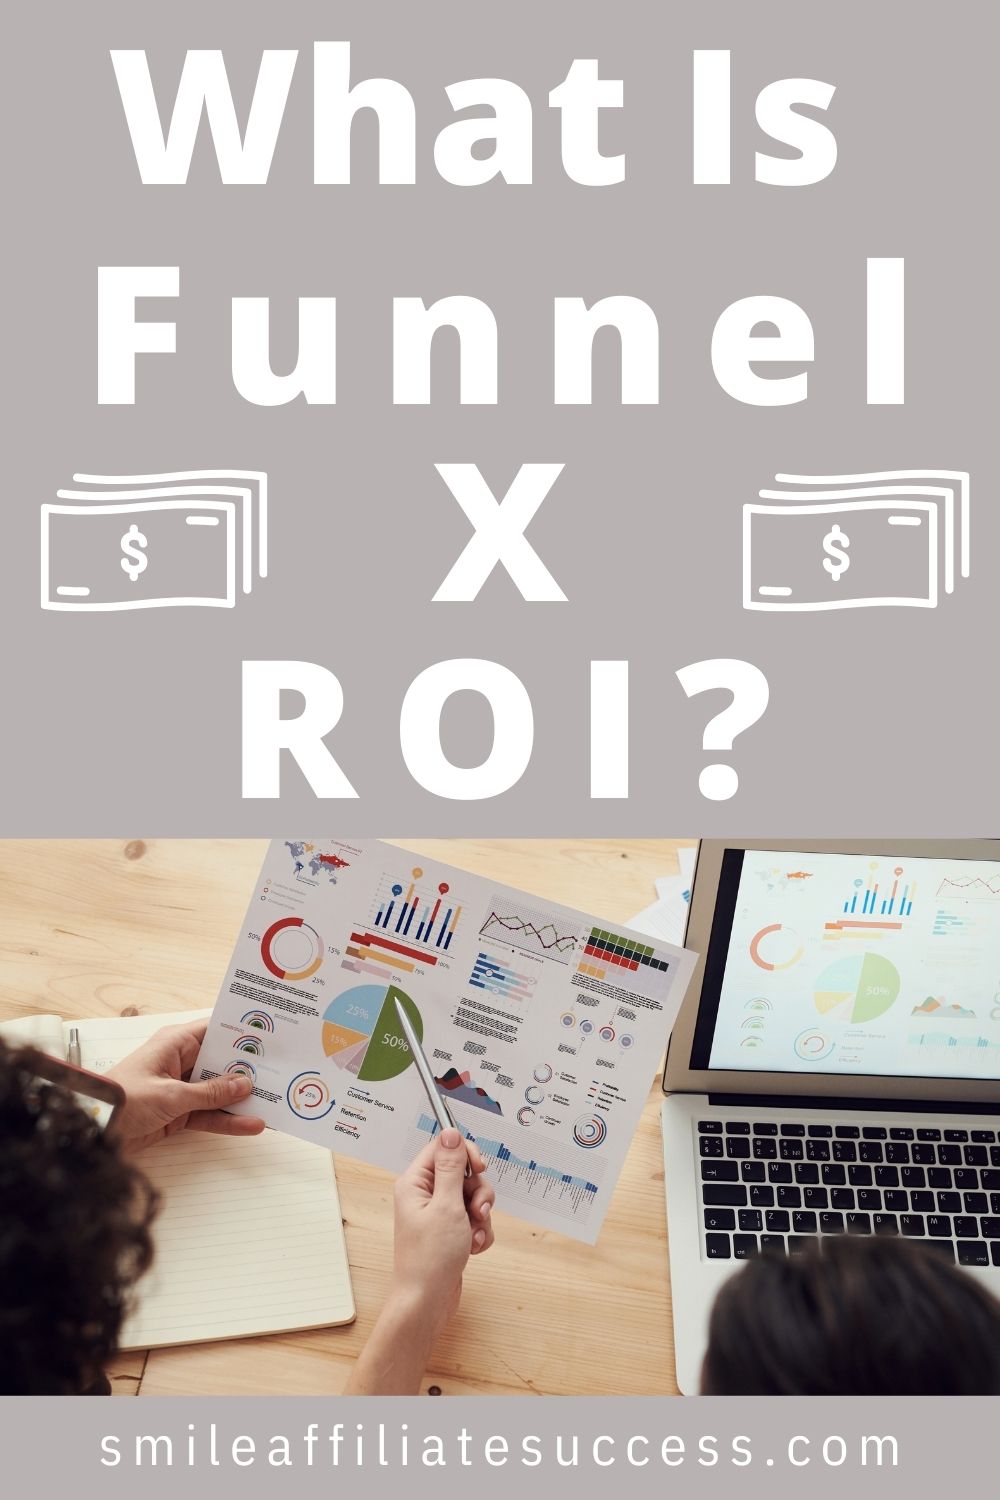 What Is Funnel X ROI?